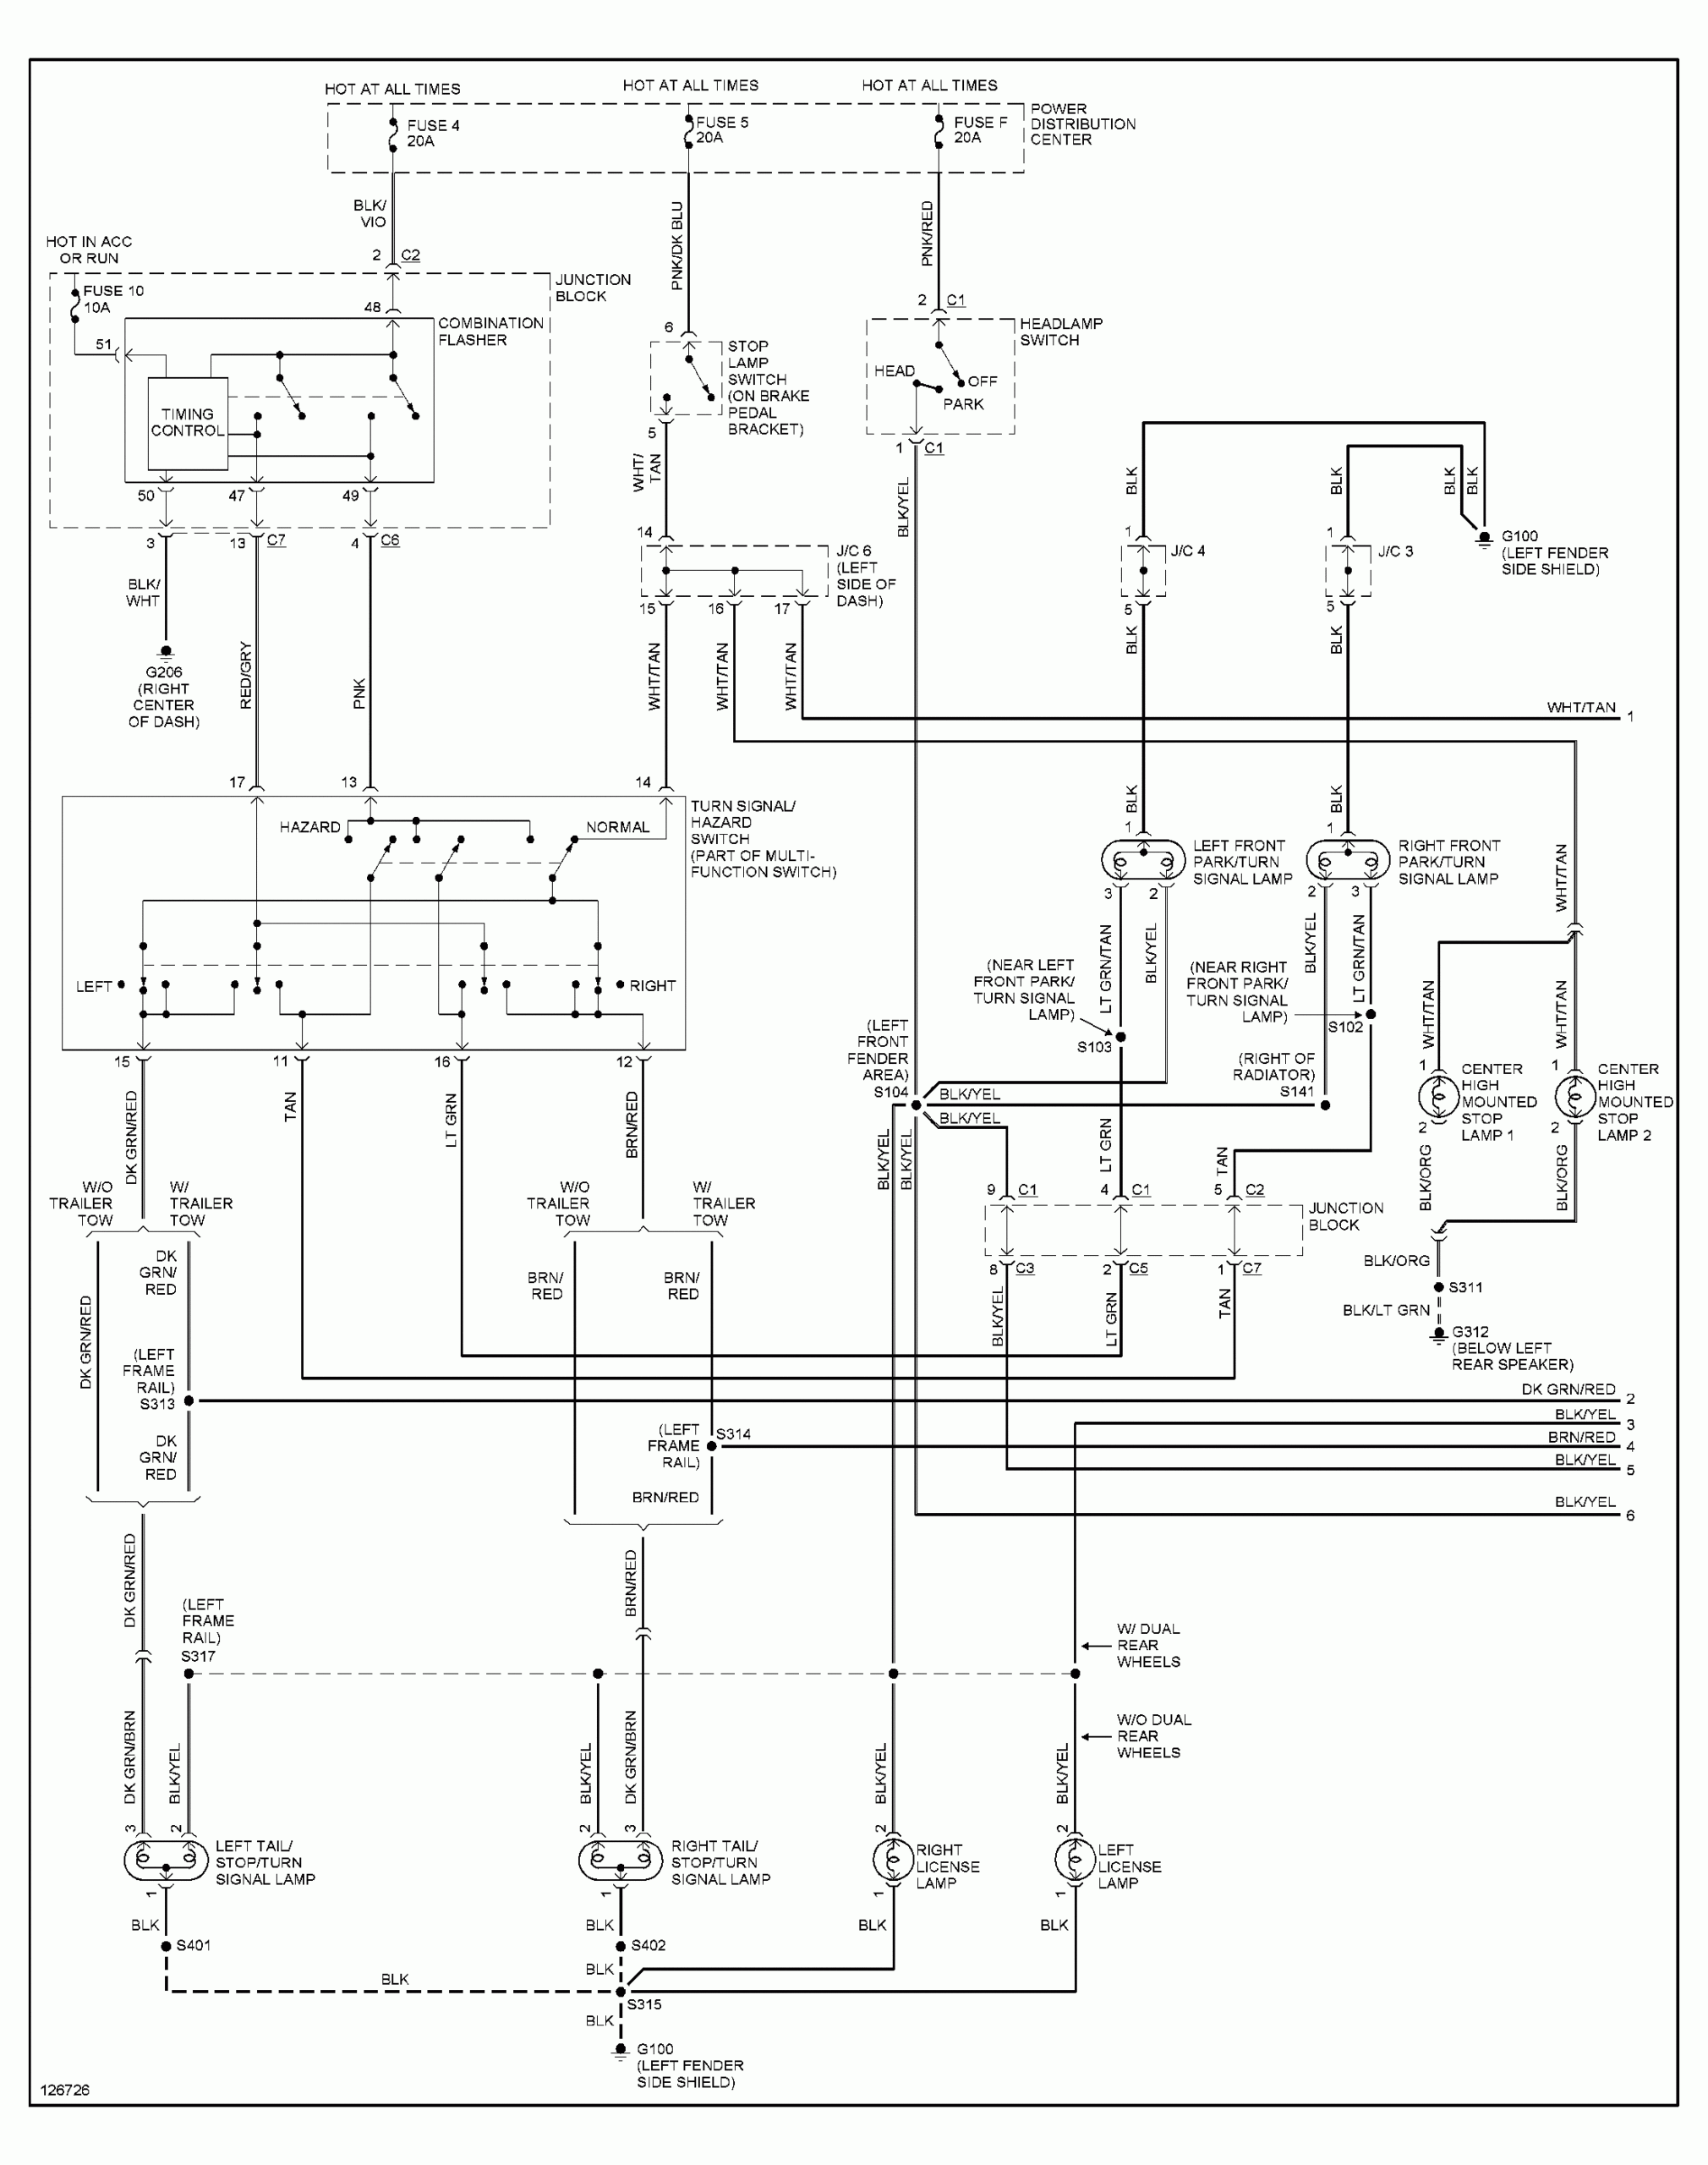 The 20 Amp Fuse For The Brake Lights Keeps Failing On My 2001 Dodge Ram  - 2001 Dodge RAM 2500 Turn Signal Wiring Diagram